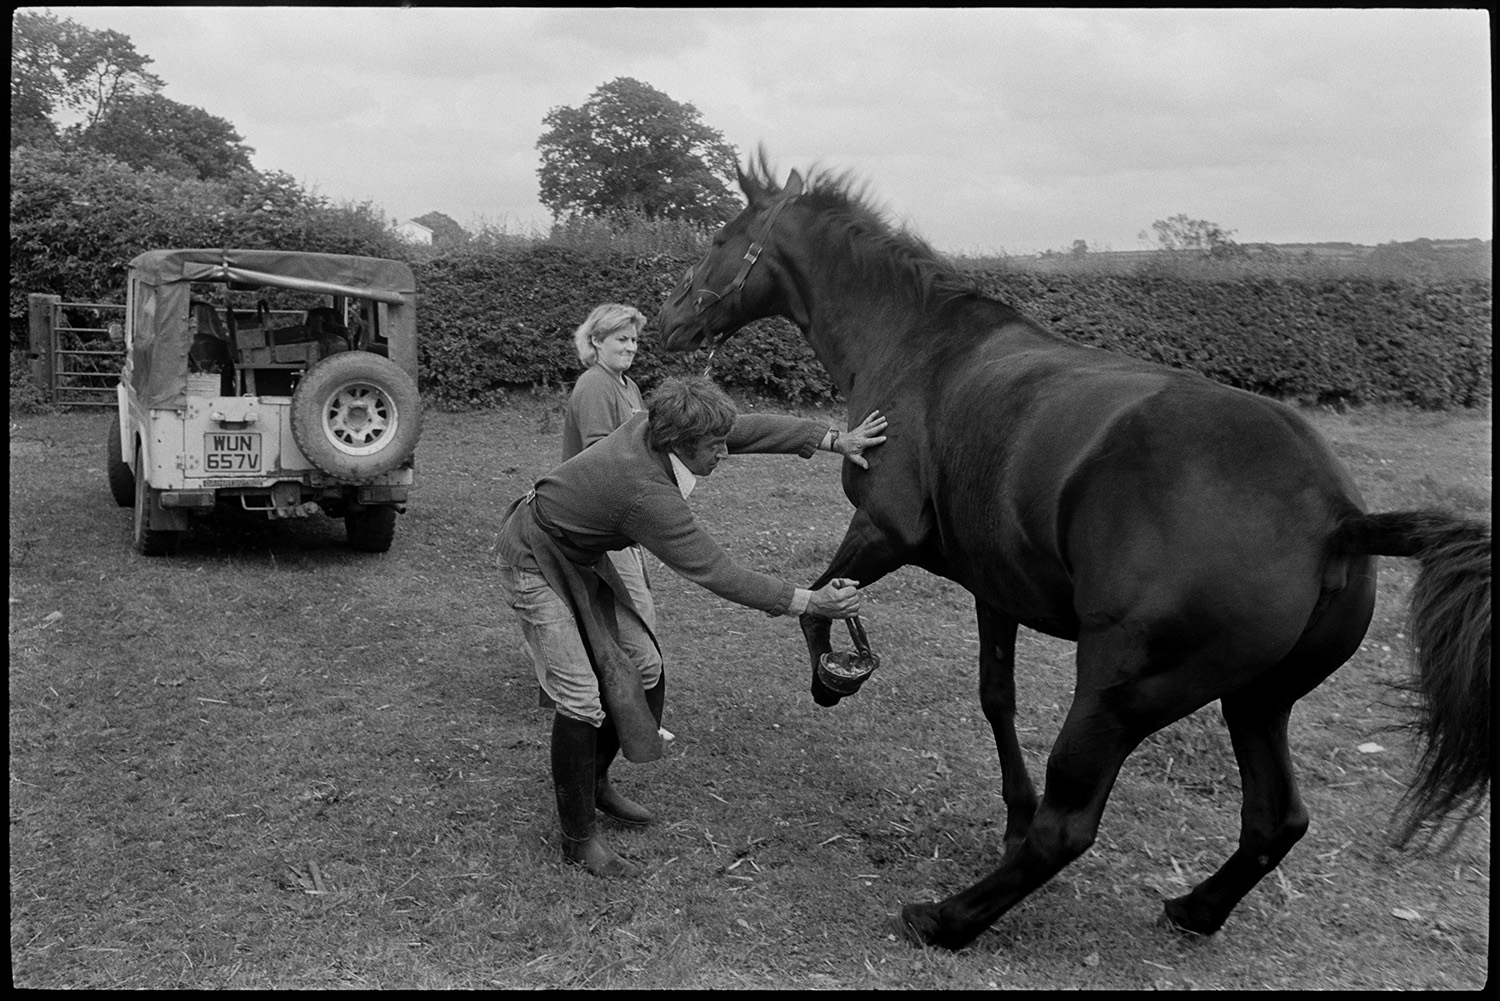 Horse taken out of stables to be shod. 
[A blacksmith shoeing a horse in a field at Dolton. Kay Allin is holding the reigns and trying to control the horse. A Land Rover is parked in the background.]